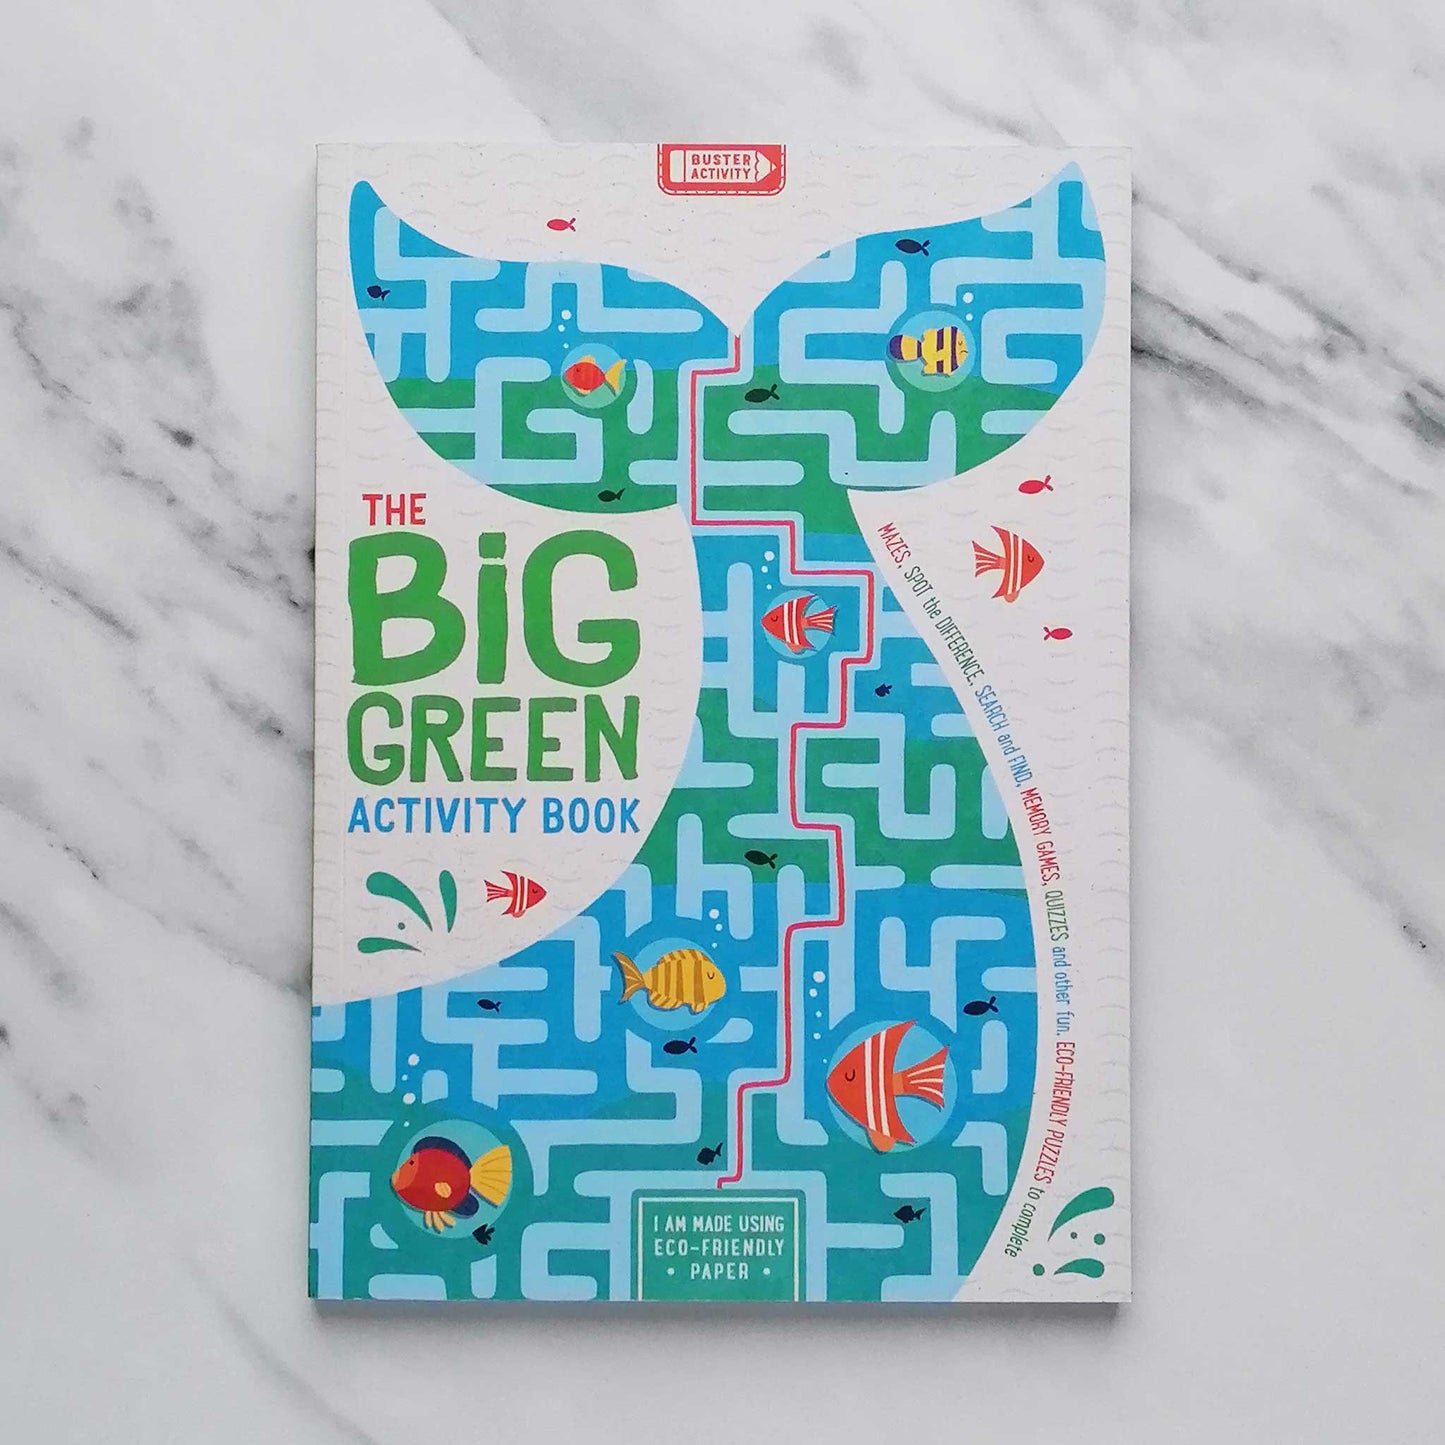 Our Bookshelf Print Books The Big Green Activity Book: Fun, Fact-filled Eco Puzzles for Kids to Complete